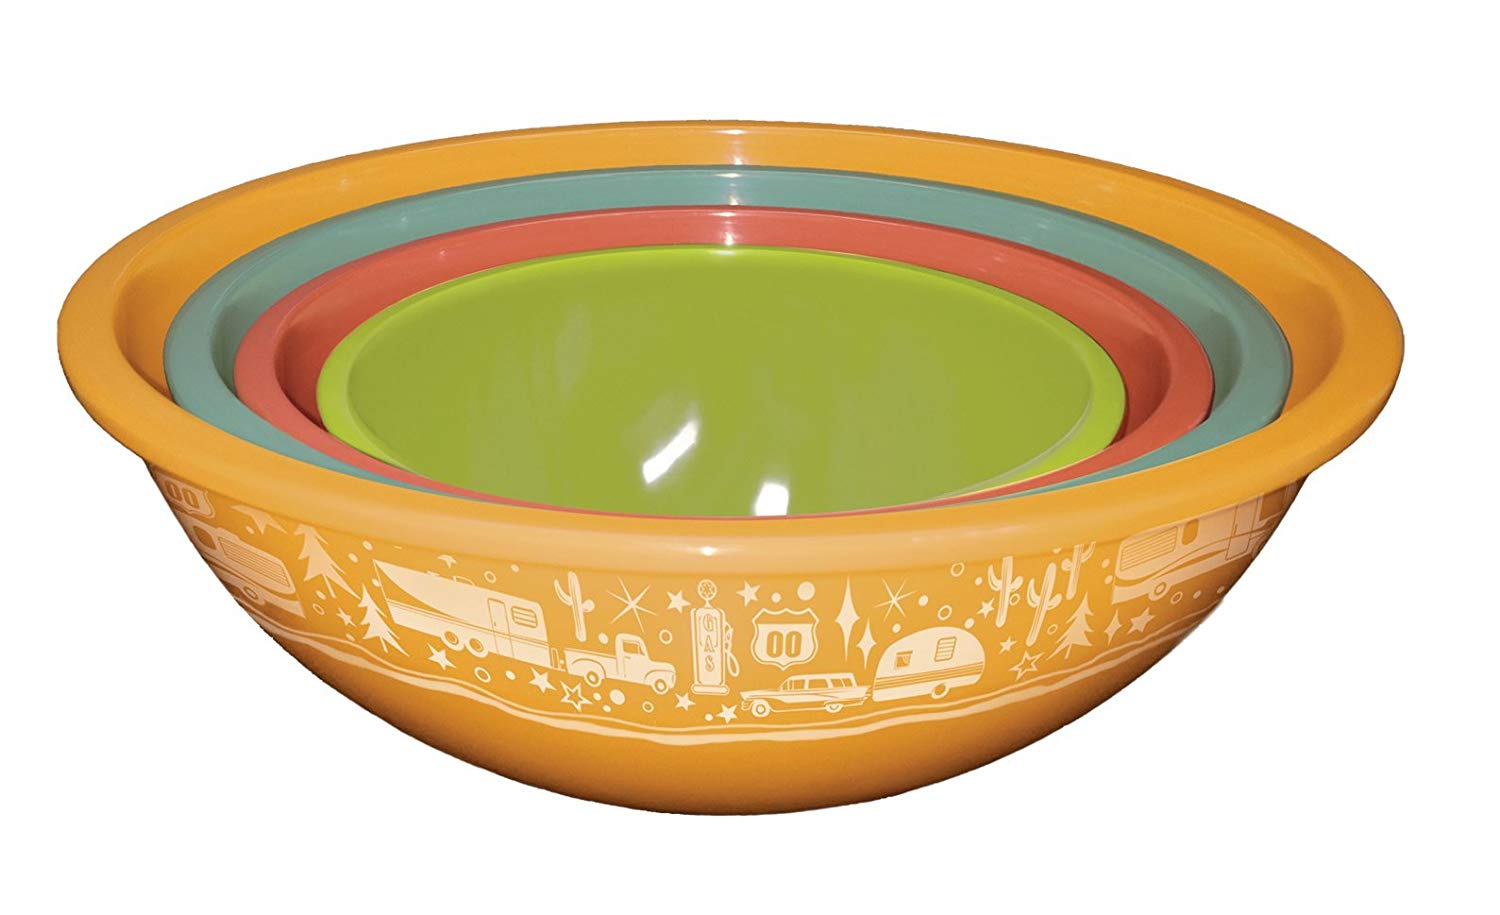 Camp Casual CC-006 Multicolor Nesting Bowls with Lids, Set of 4 